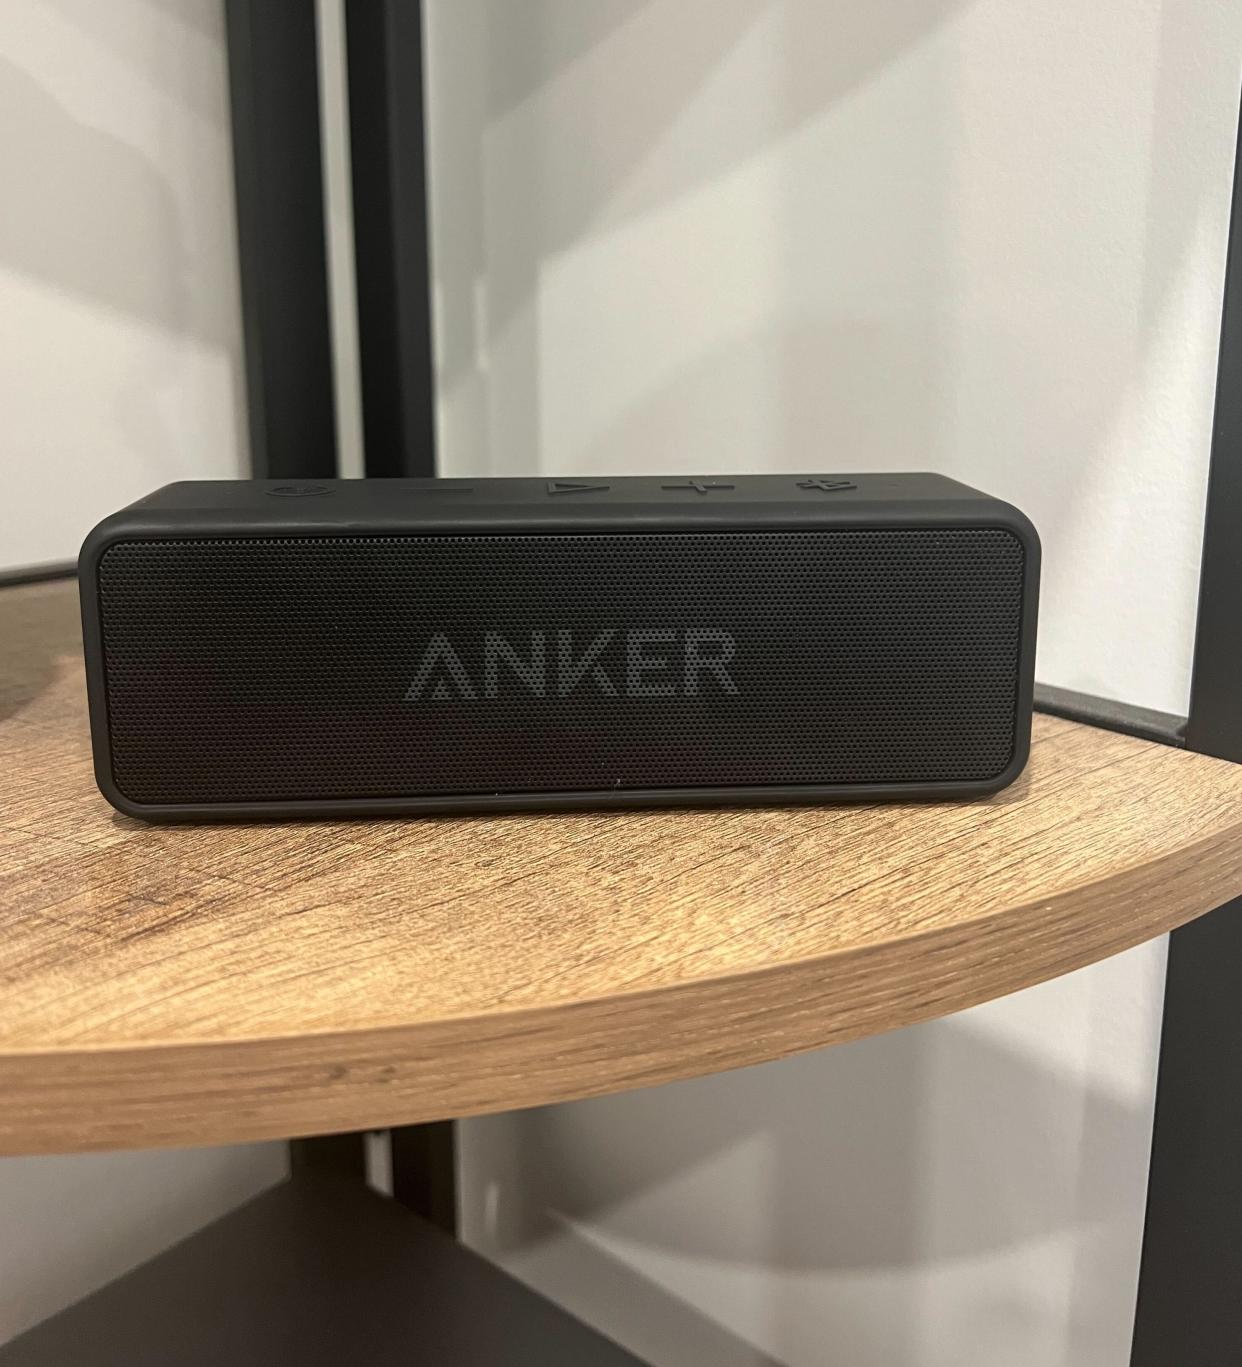 Mili Godio bought this Anker Soundcore 2 to be her go-to portable speaker for summer outings. (Mili Godio)